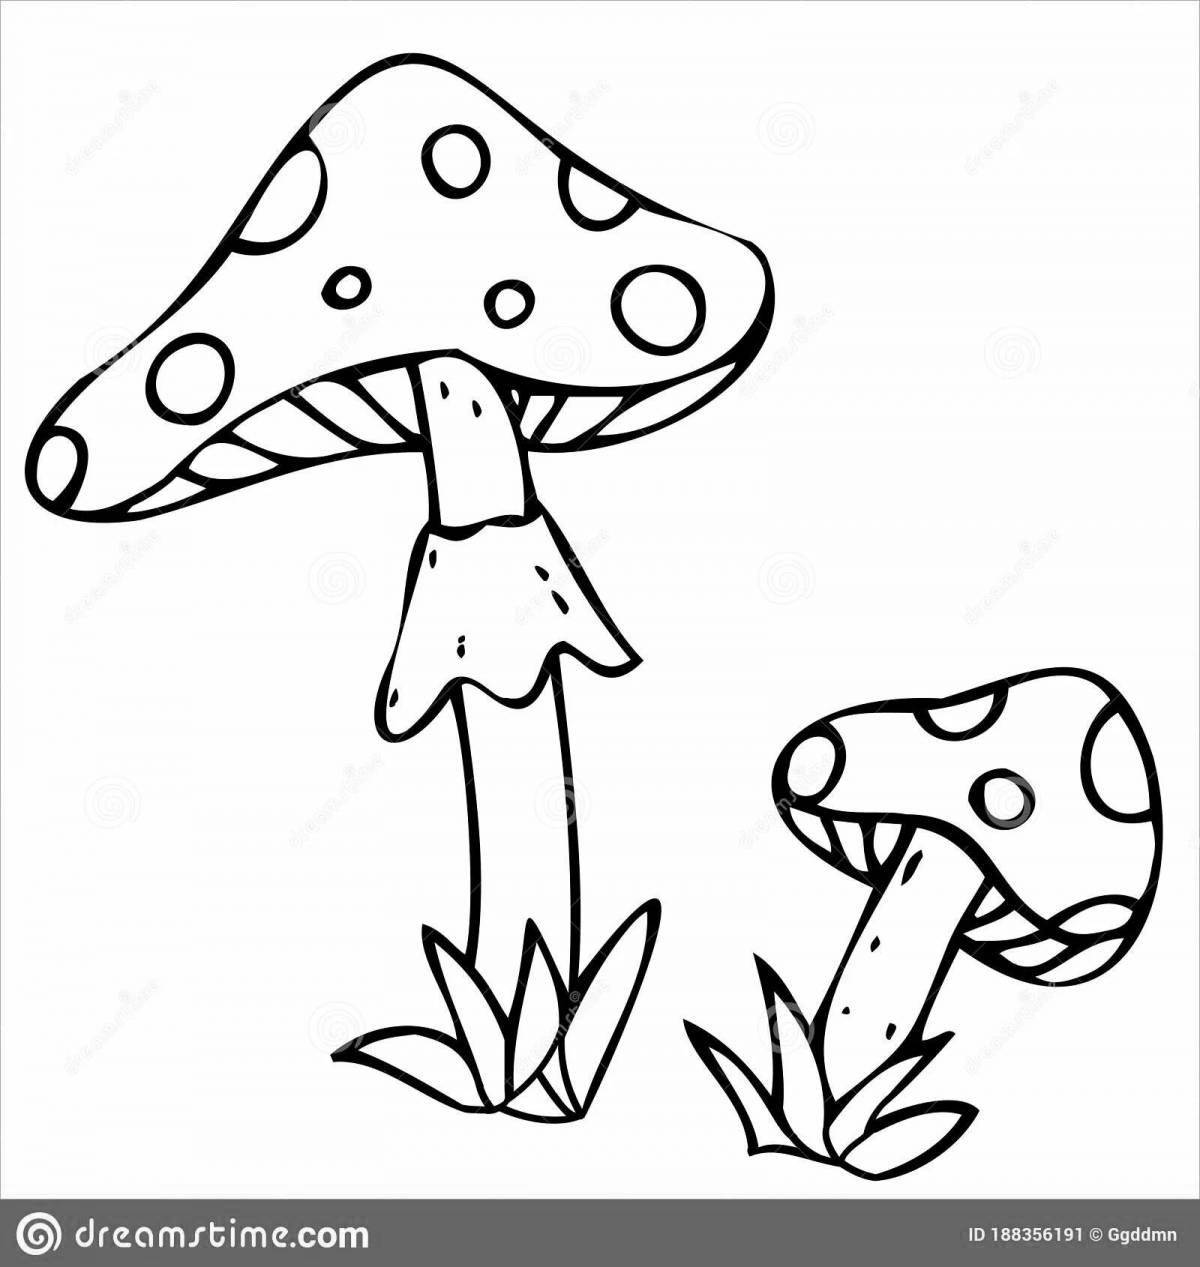 Coloring book glowing fly agaric frog